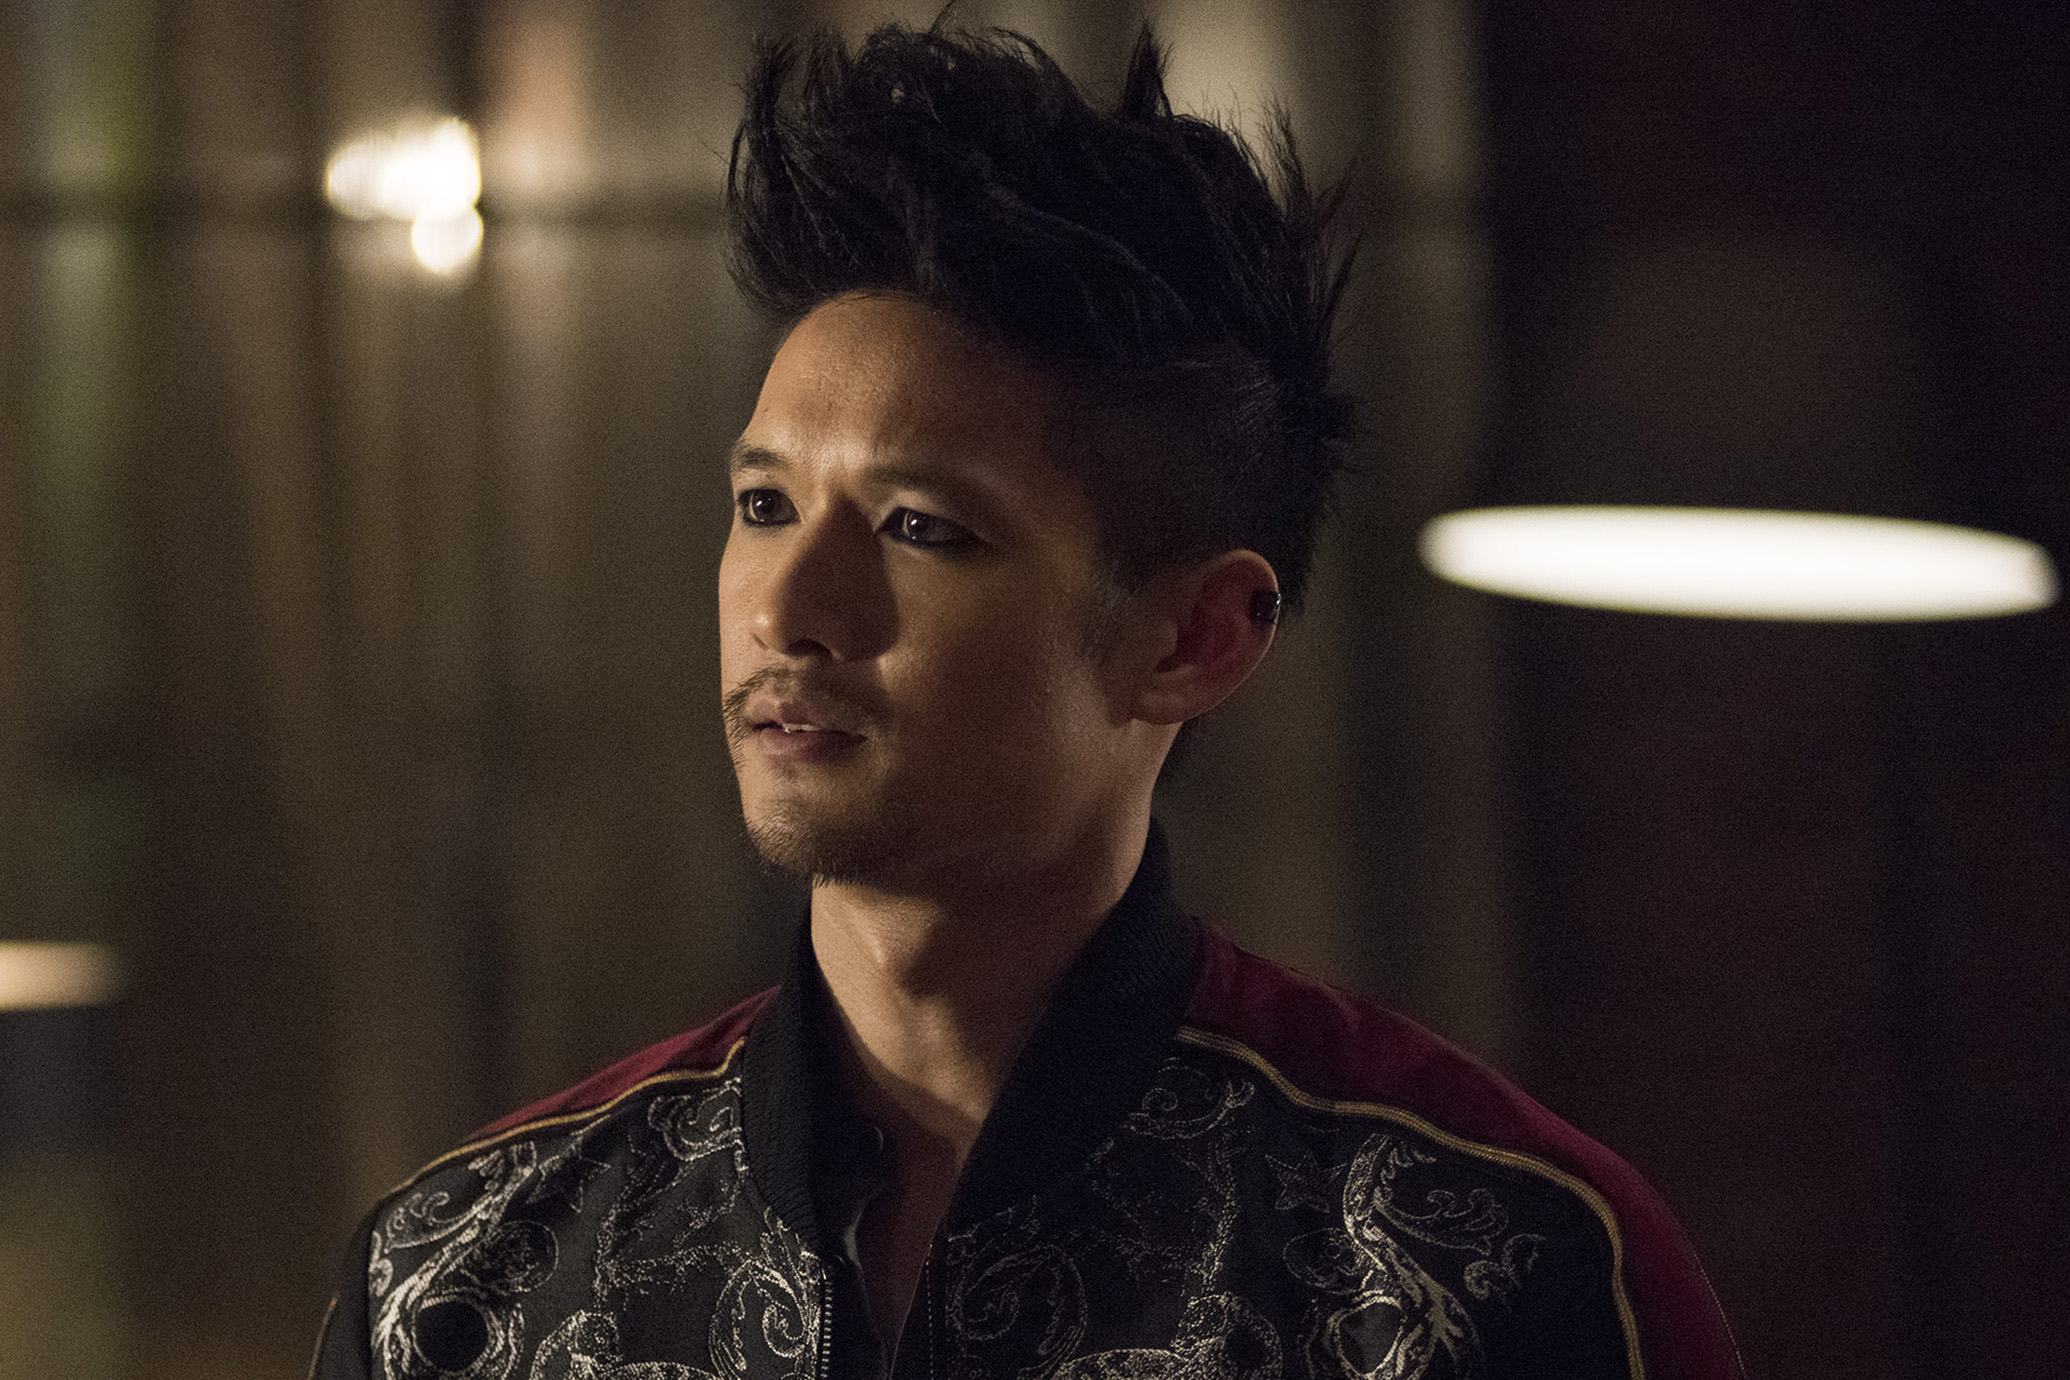 Malec star Harry Shum Jr.'s first TV role